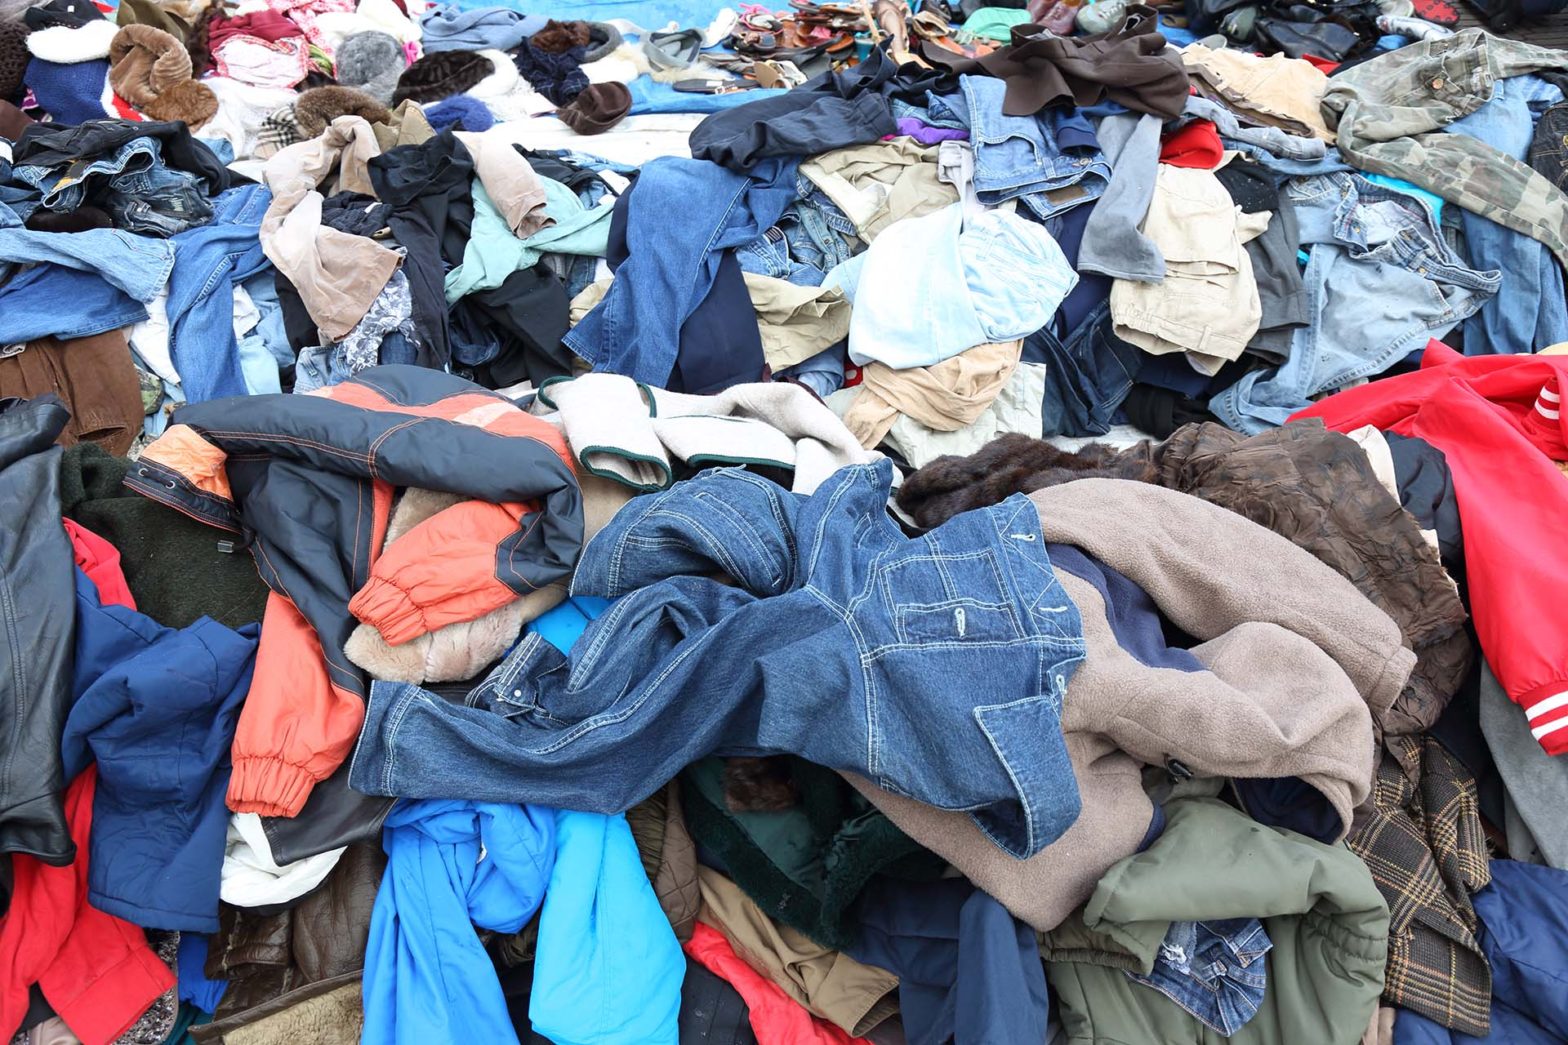 20 Things You Can Do With Old Clothes That You Can't Donate